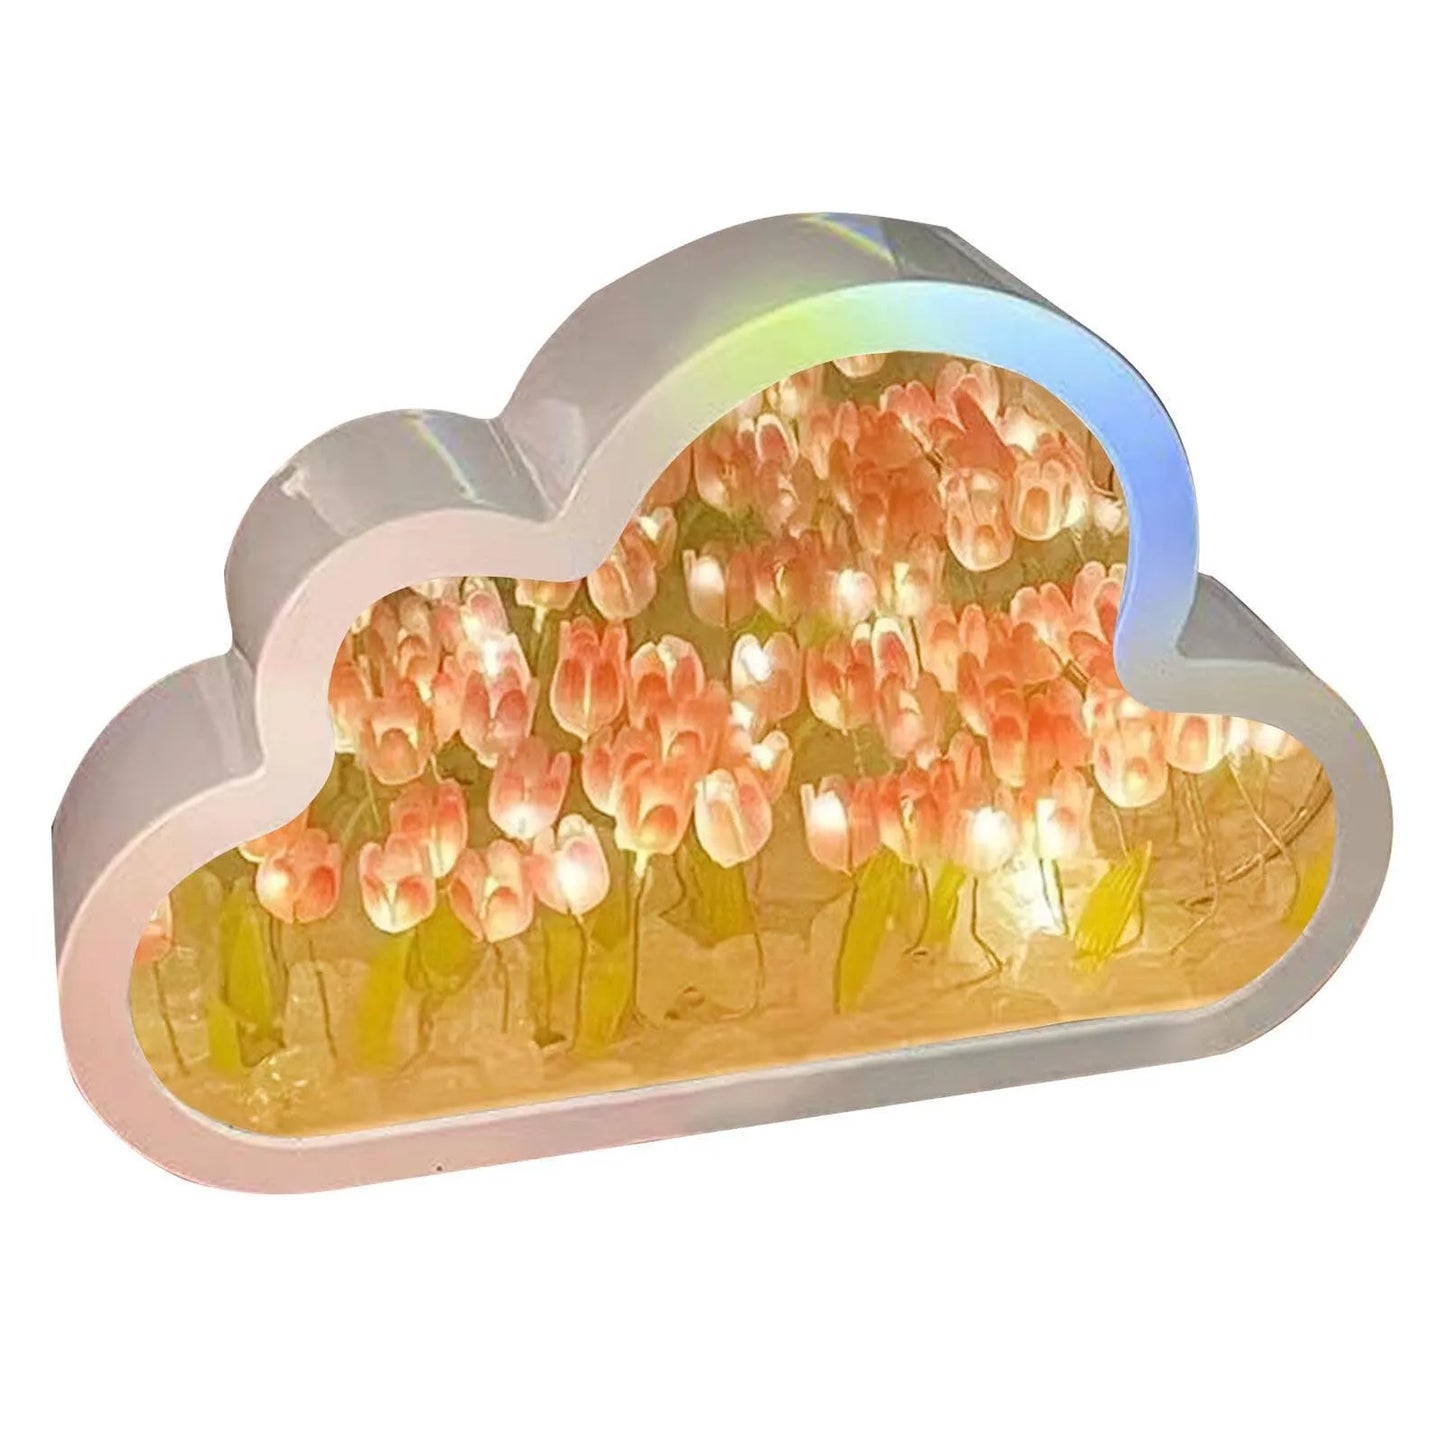 Cloud-shaped LED night light with tulip ornaments and mirror table lamps, providing decorative lighting for the bedroom.